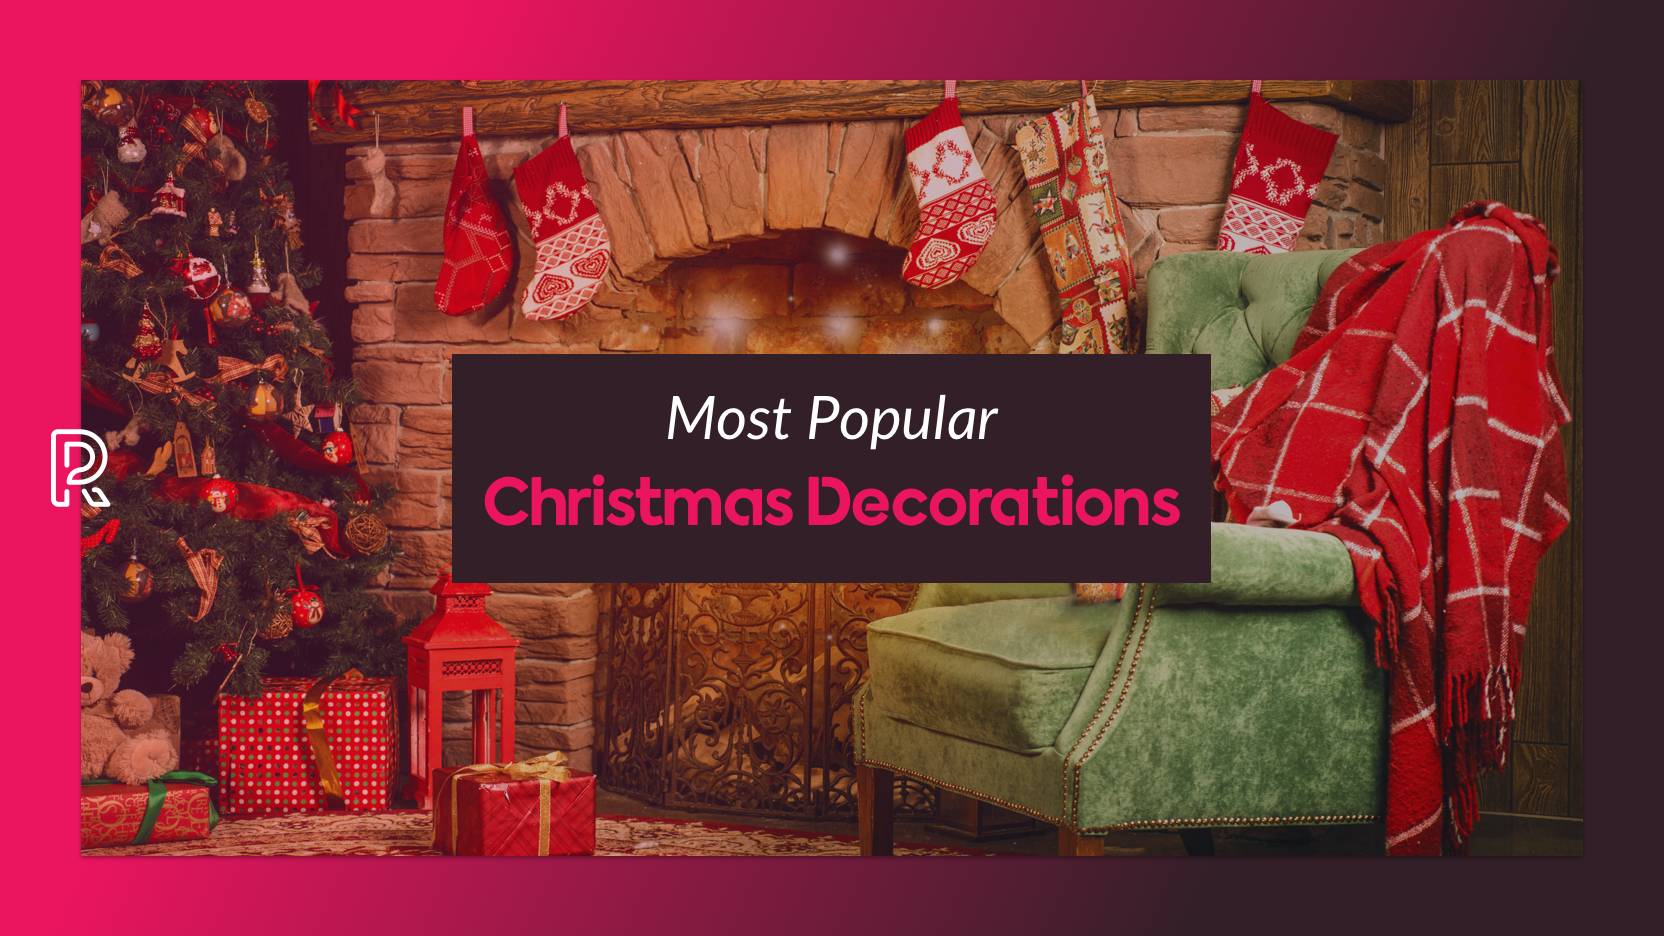 Most popular Christmas decorations right now